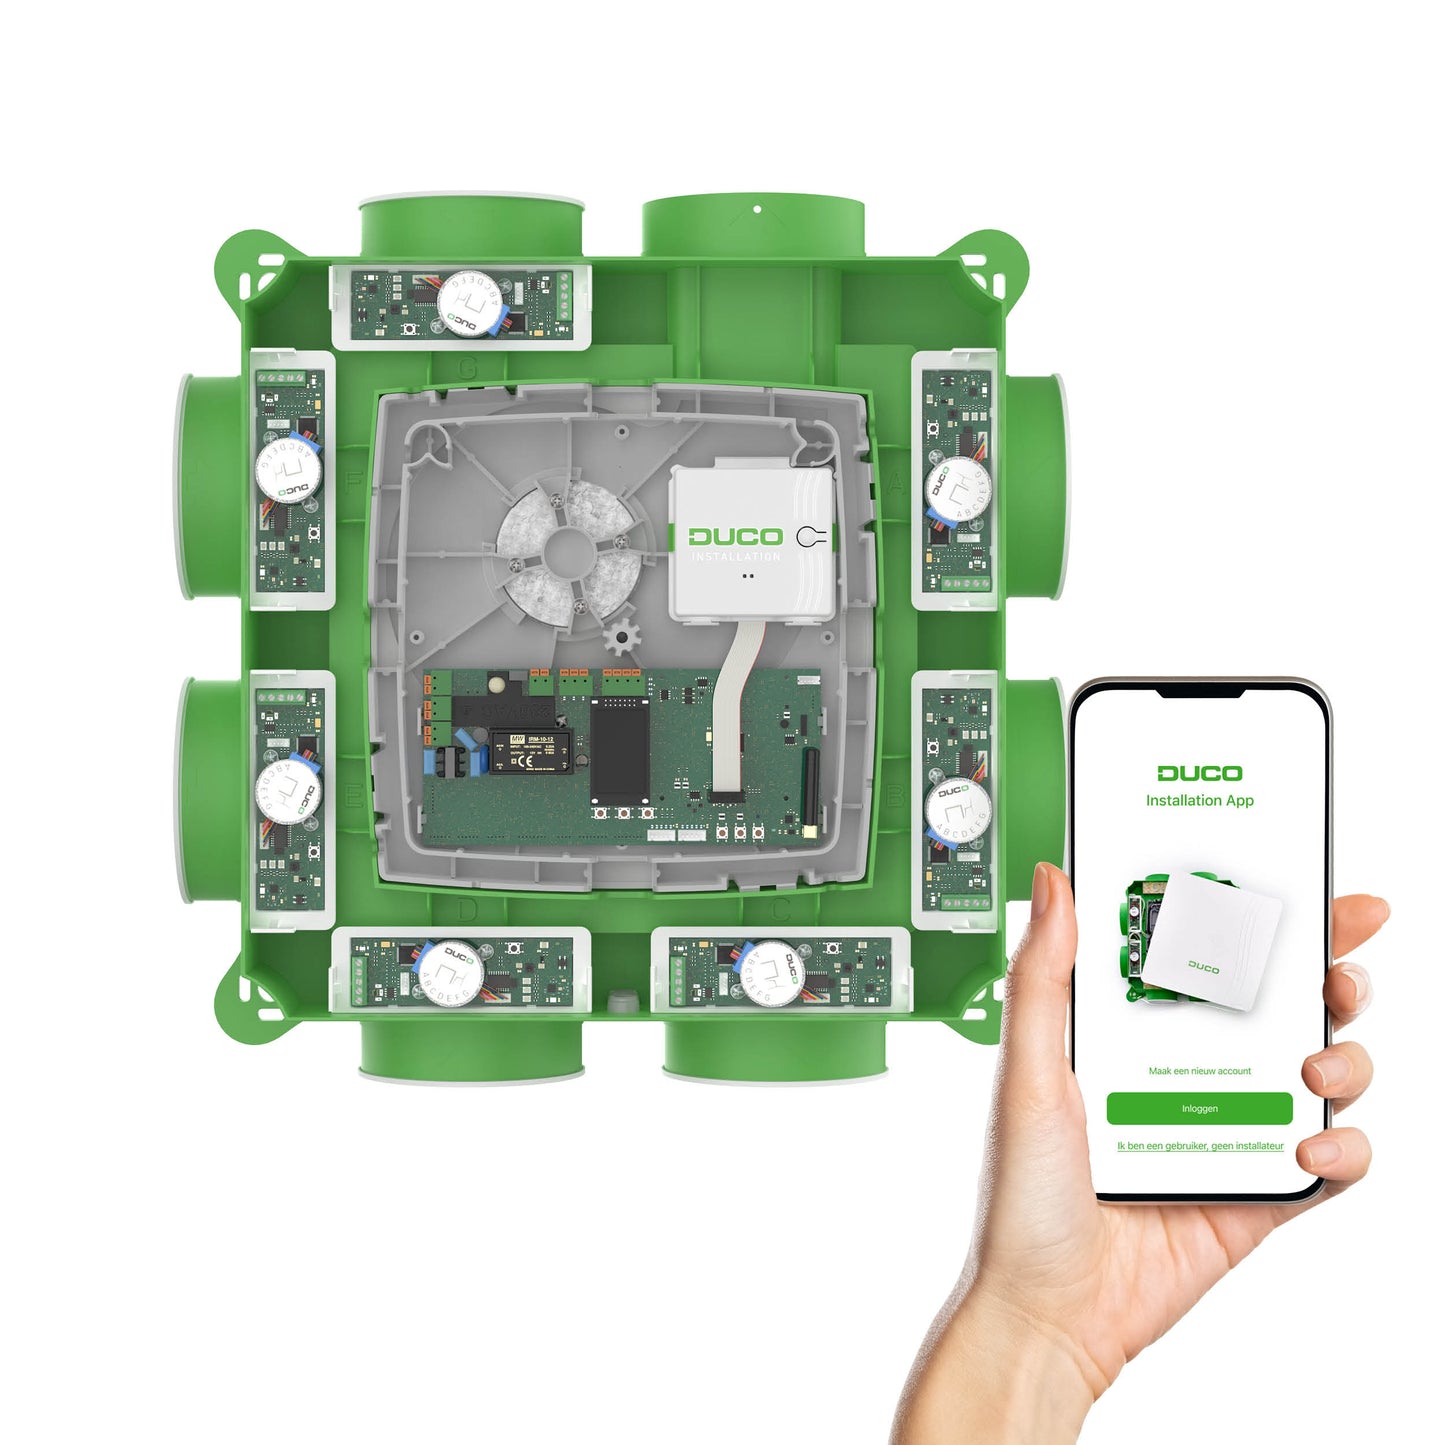 Duco Installation App with DucoBox Focus + Duco Installation Kit